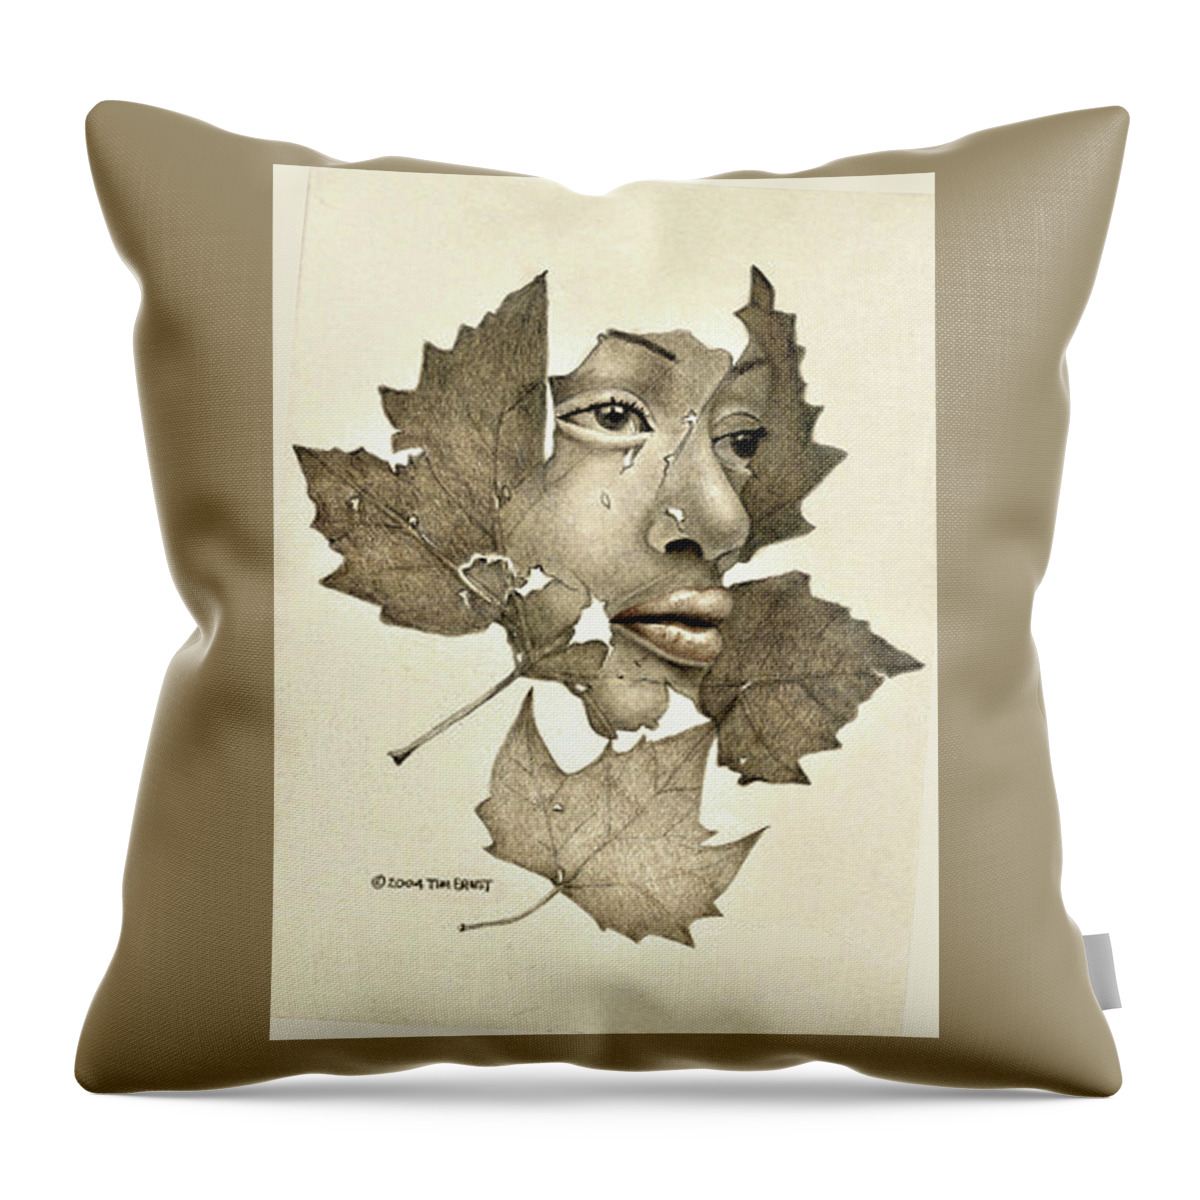 Black.black Woman Throw Pillow featuring the digital art Tears by Tim Ernst